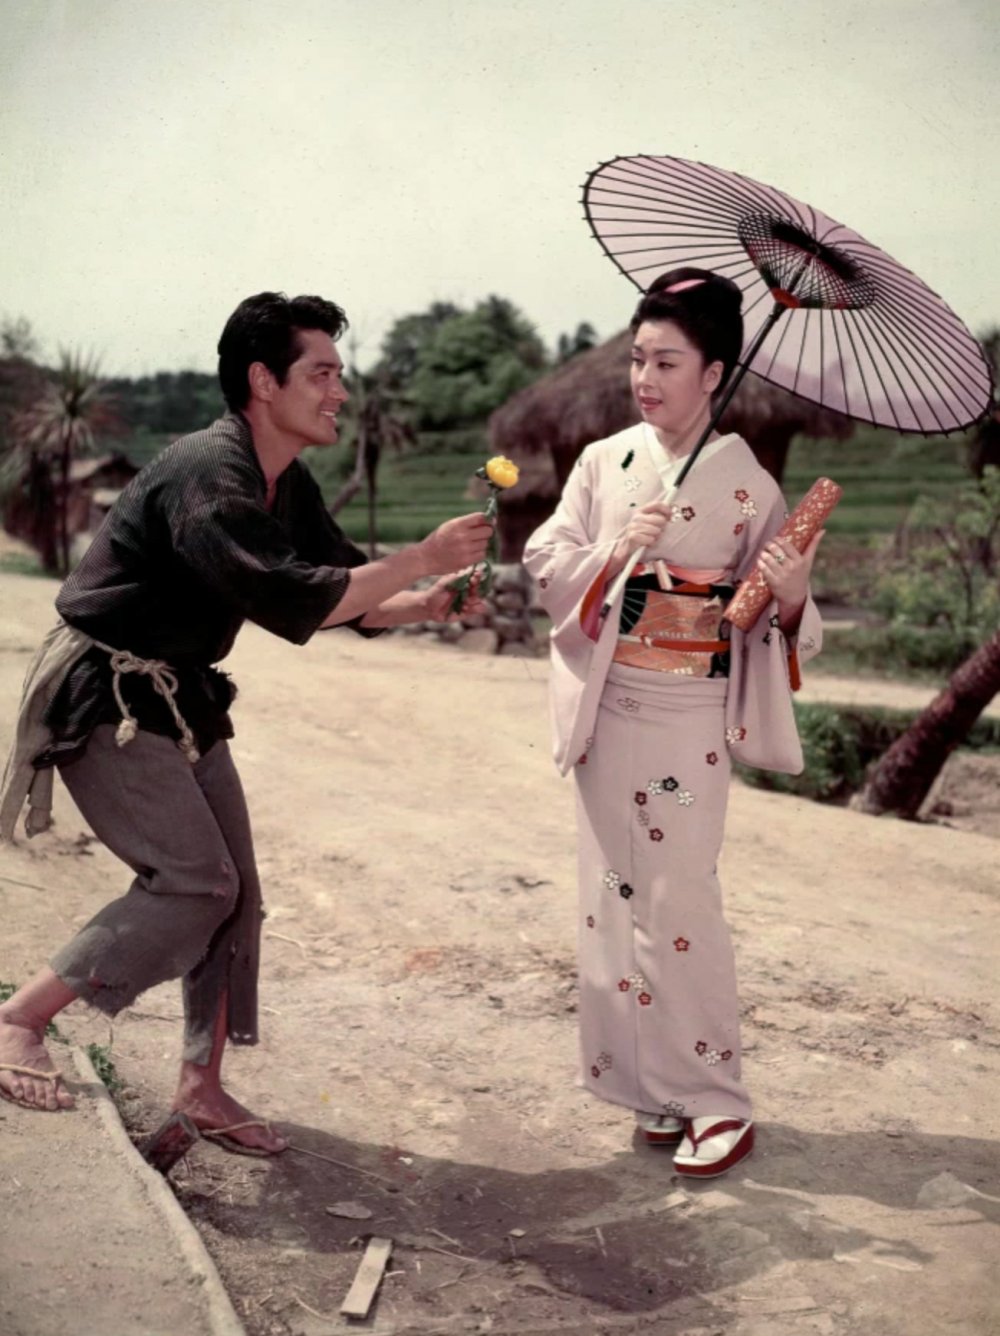 Kyo as Lotus Blossom in The Teahouse of the August Moon (1956)